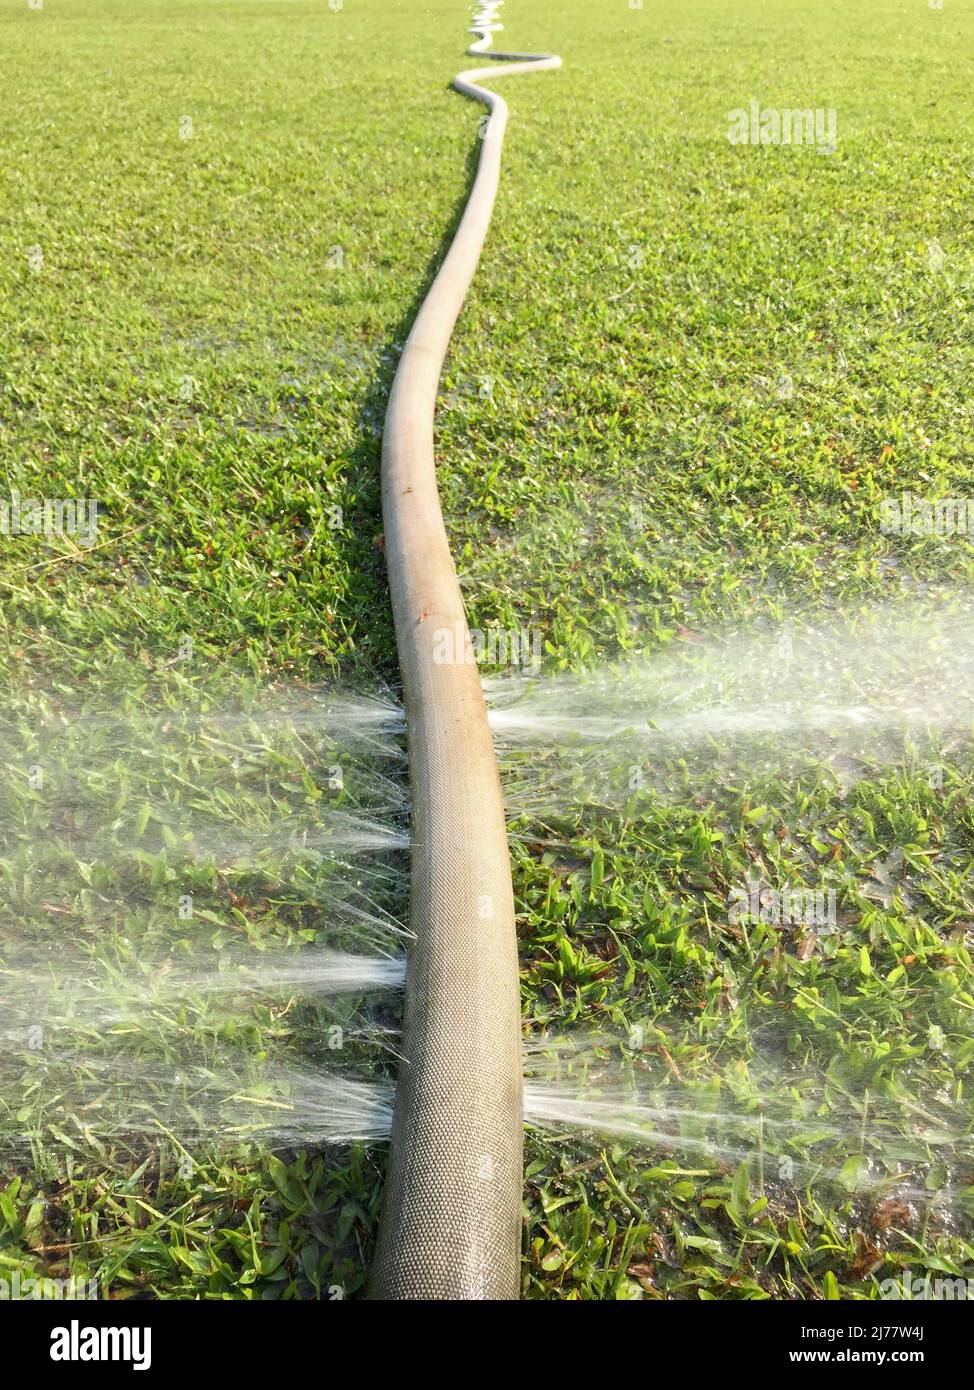 wasting water - water leaking from hole in a hose Stock Photo